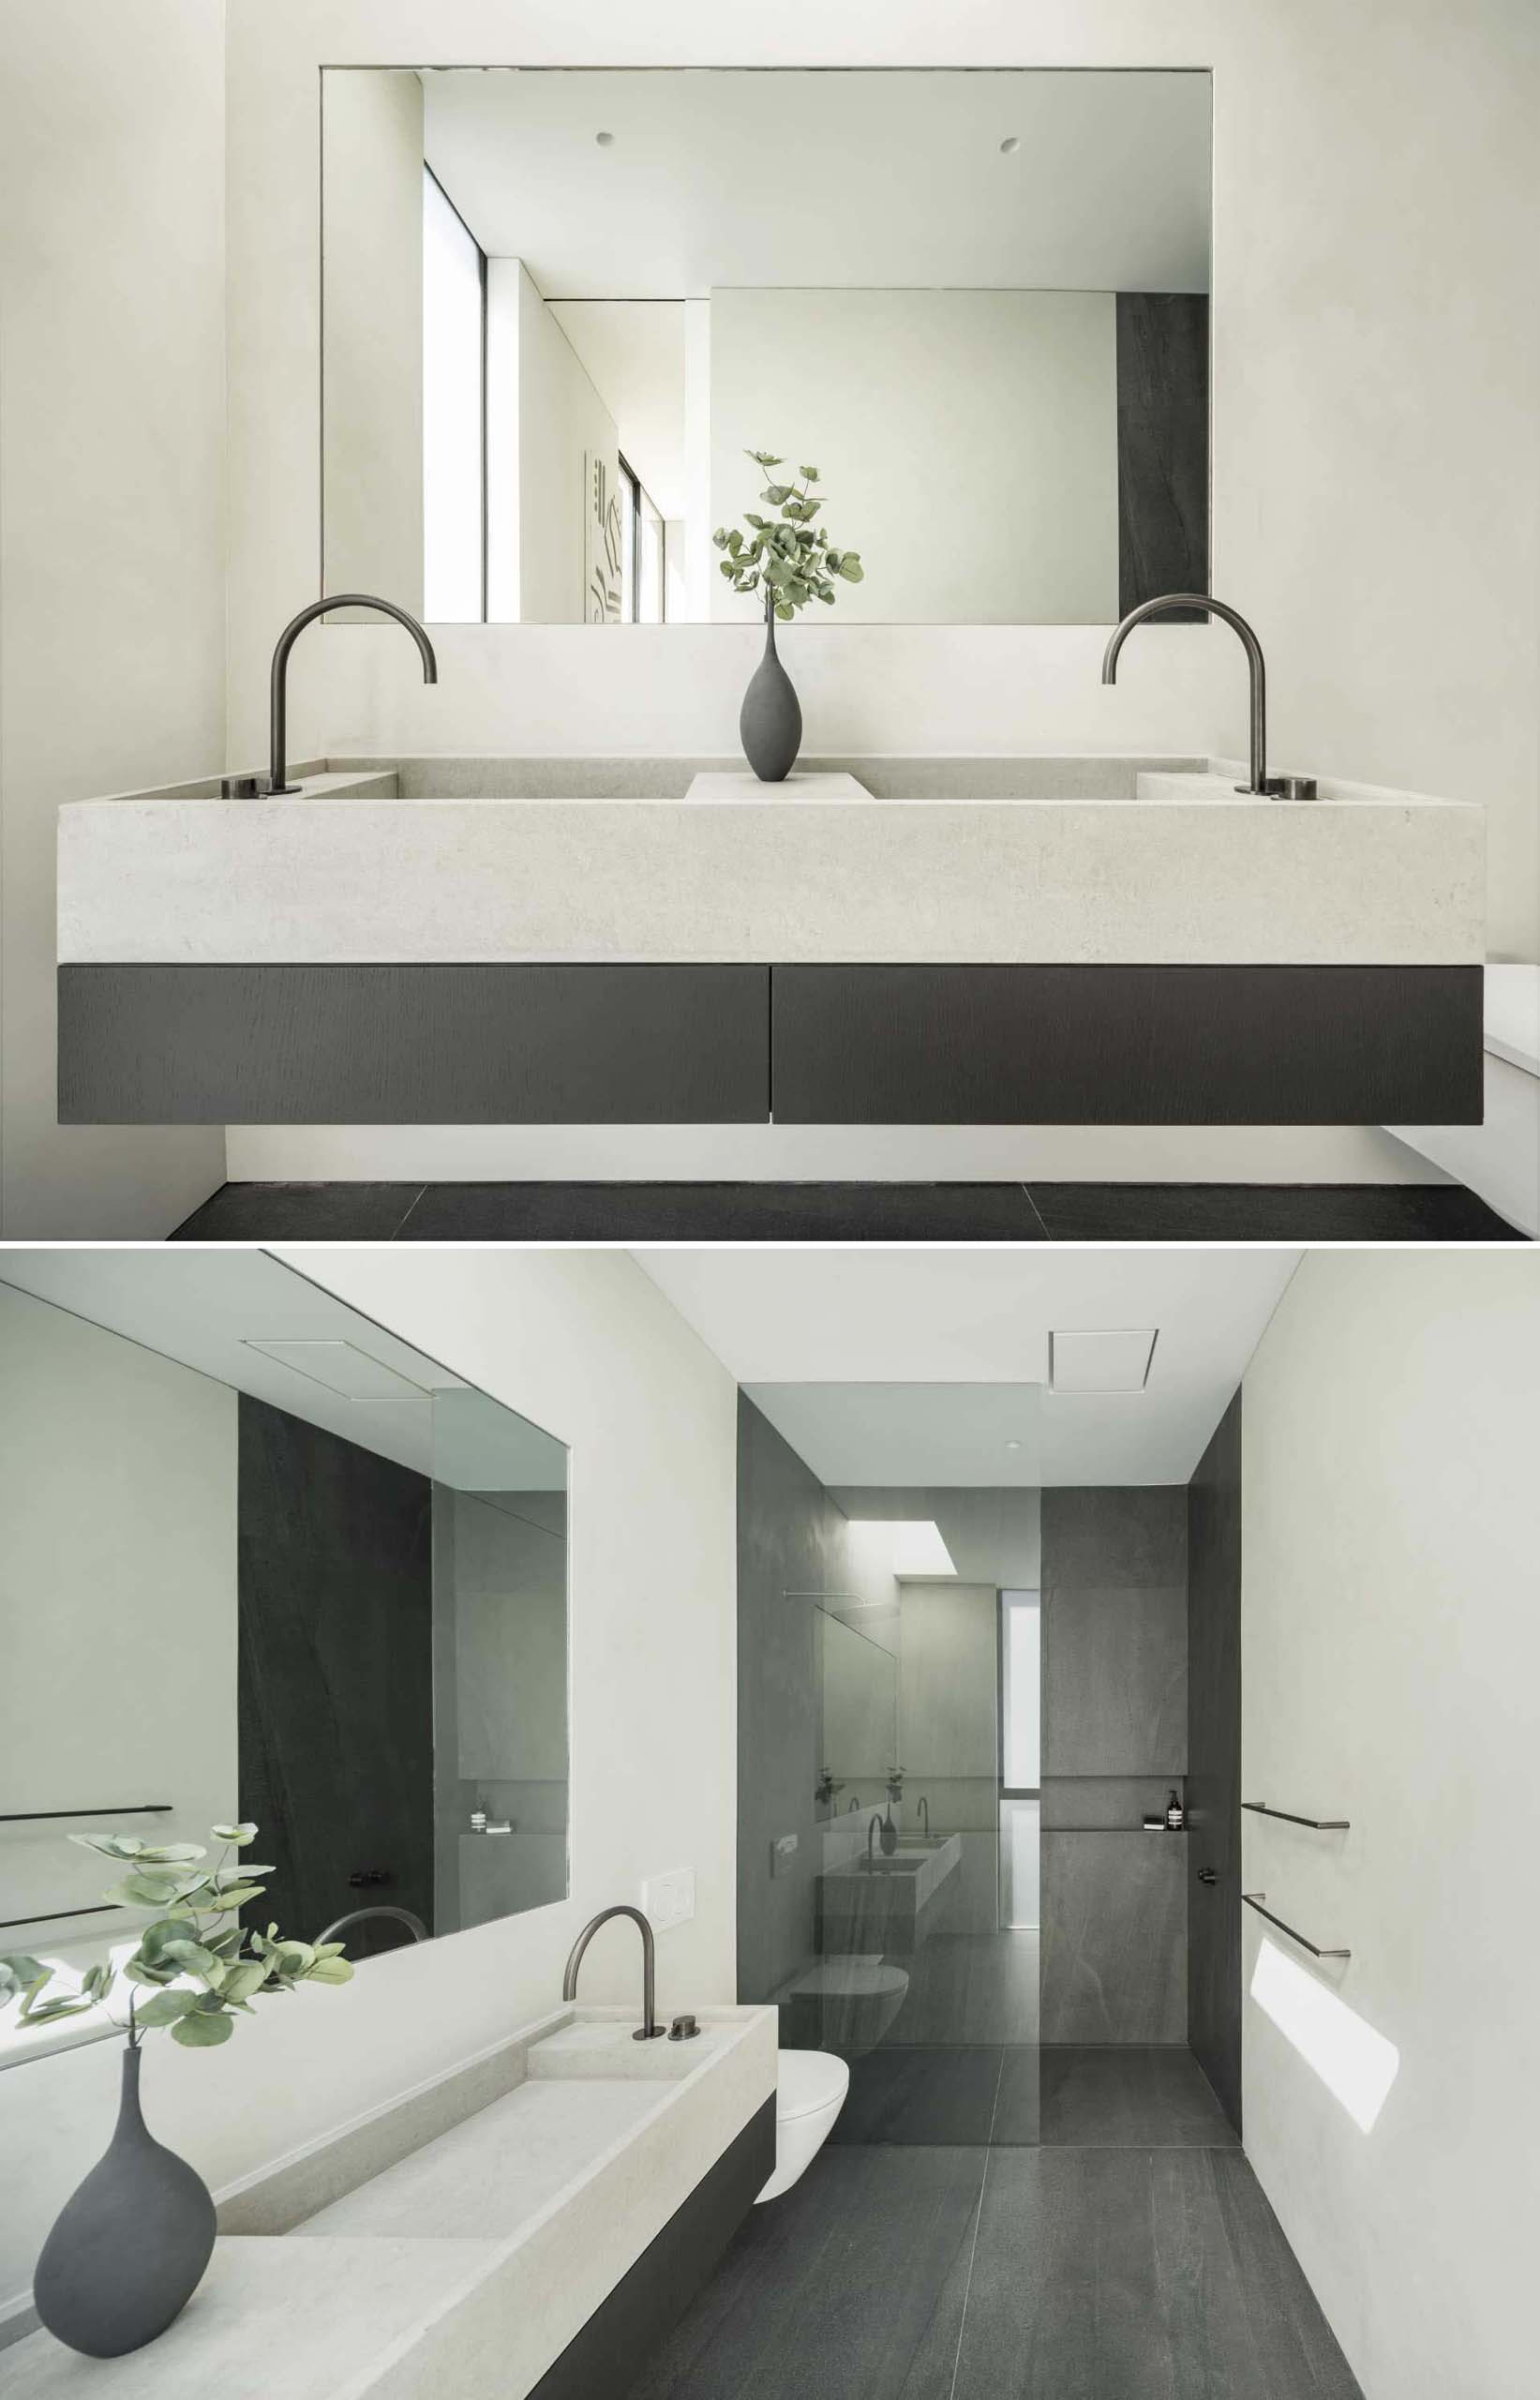 A modern bathroom with a a double vanity and a dark gray shower with a shelving niche.